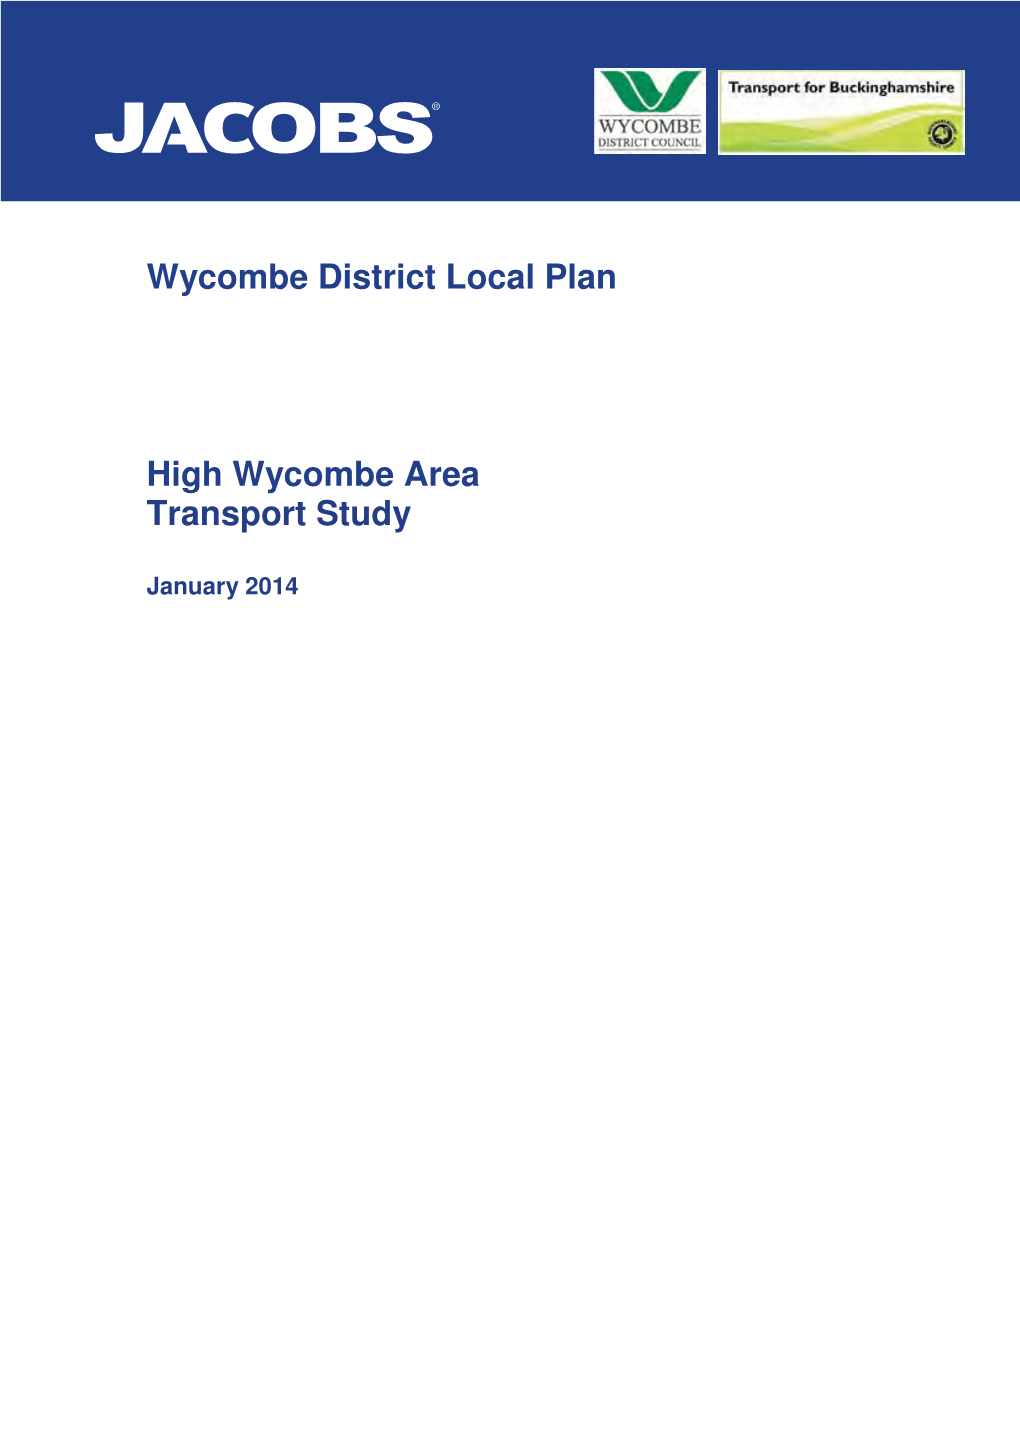 High Wycombe Area Transport Study